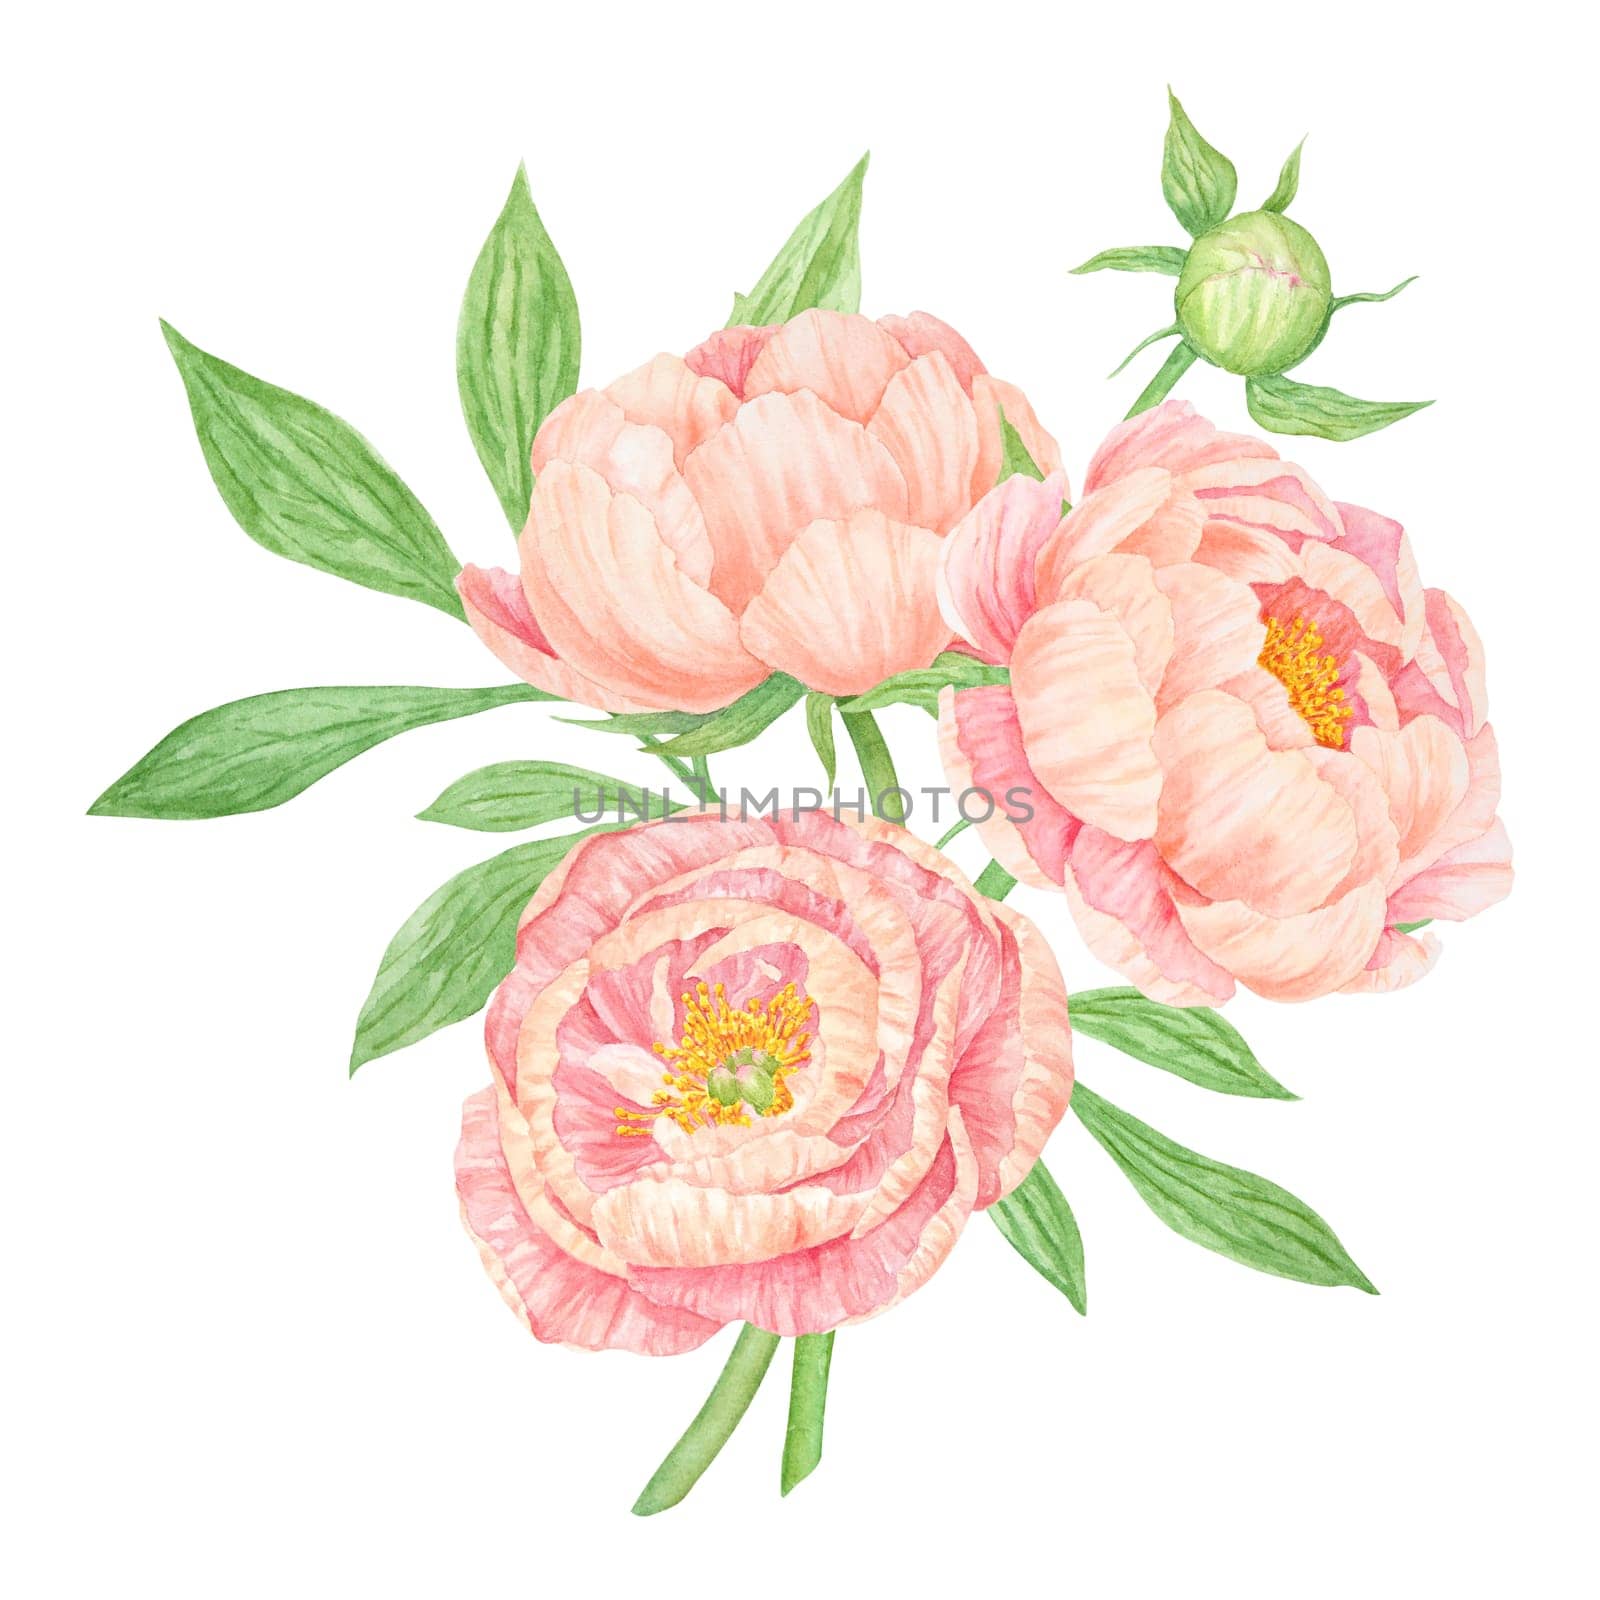 Peach peony bouquet watercolor hand drawn painting. Chinese national symbol illustration. Realistic flower clipart, floral arrangement for card design, wedding invitation, prints, textile, packing by florainlove_art